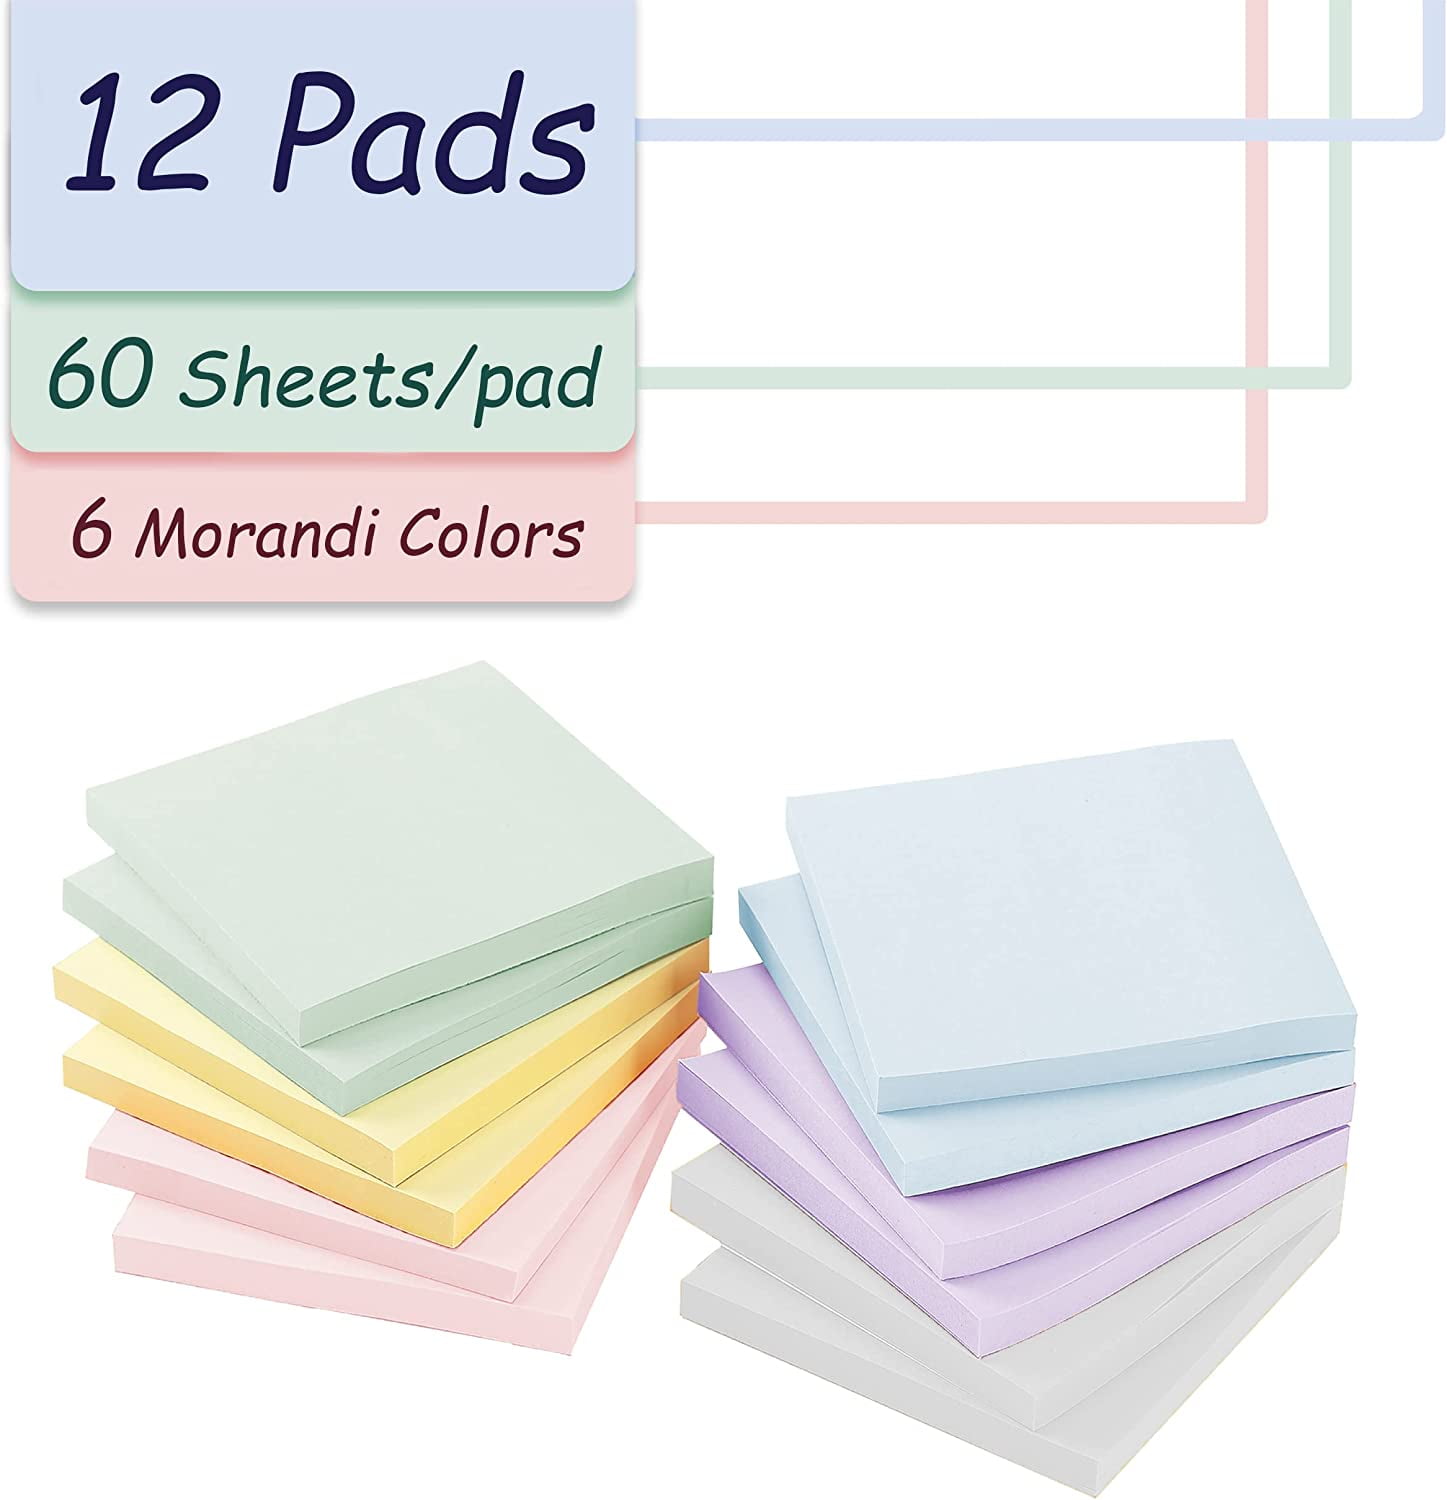 Homolley (12 Pads) Sticky Notes 3x3 in 100 Sheets/Pad, Self-Sticky Note Pads, 6 Bright Colors Super Sticky Pads - Easy to Post for SCH